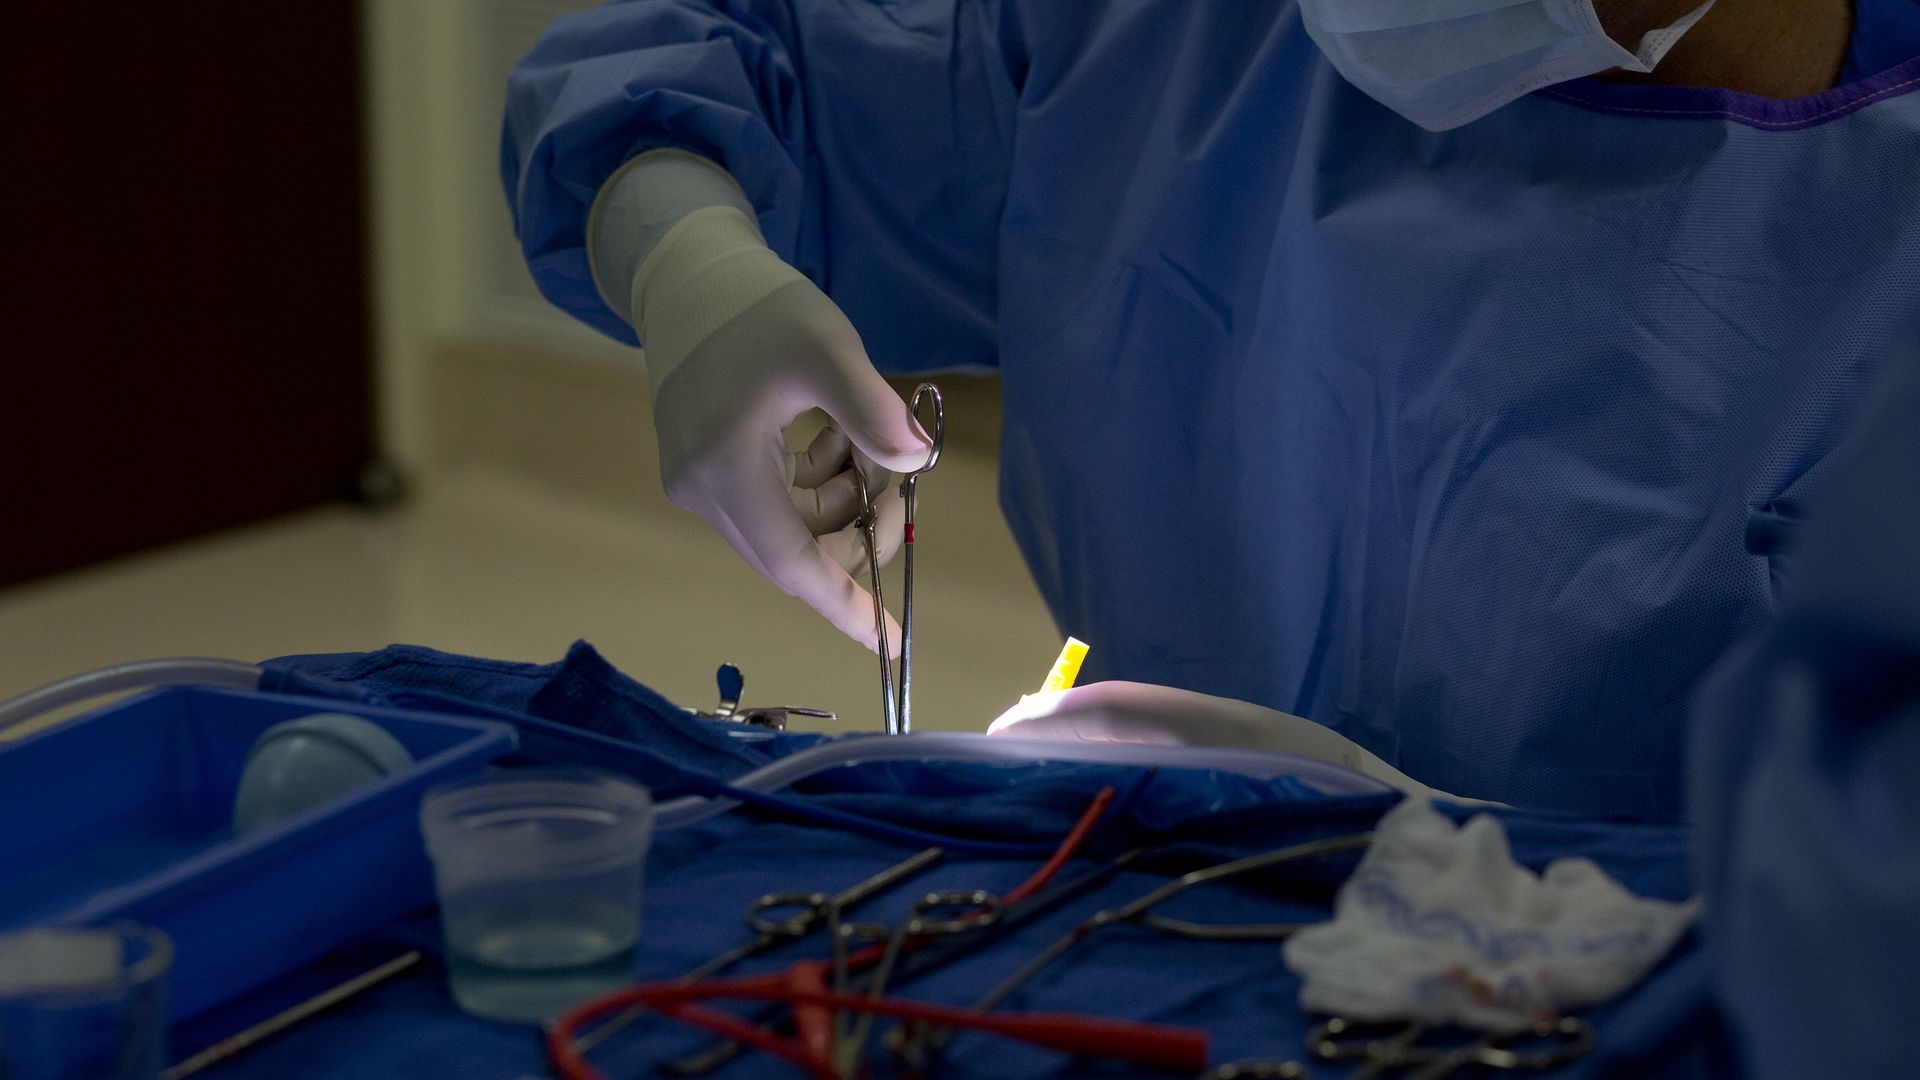 A surgeon uses surgical tools on a patient in a hospital operating room.